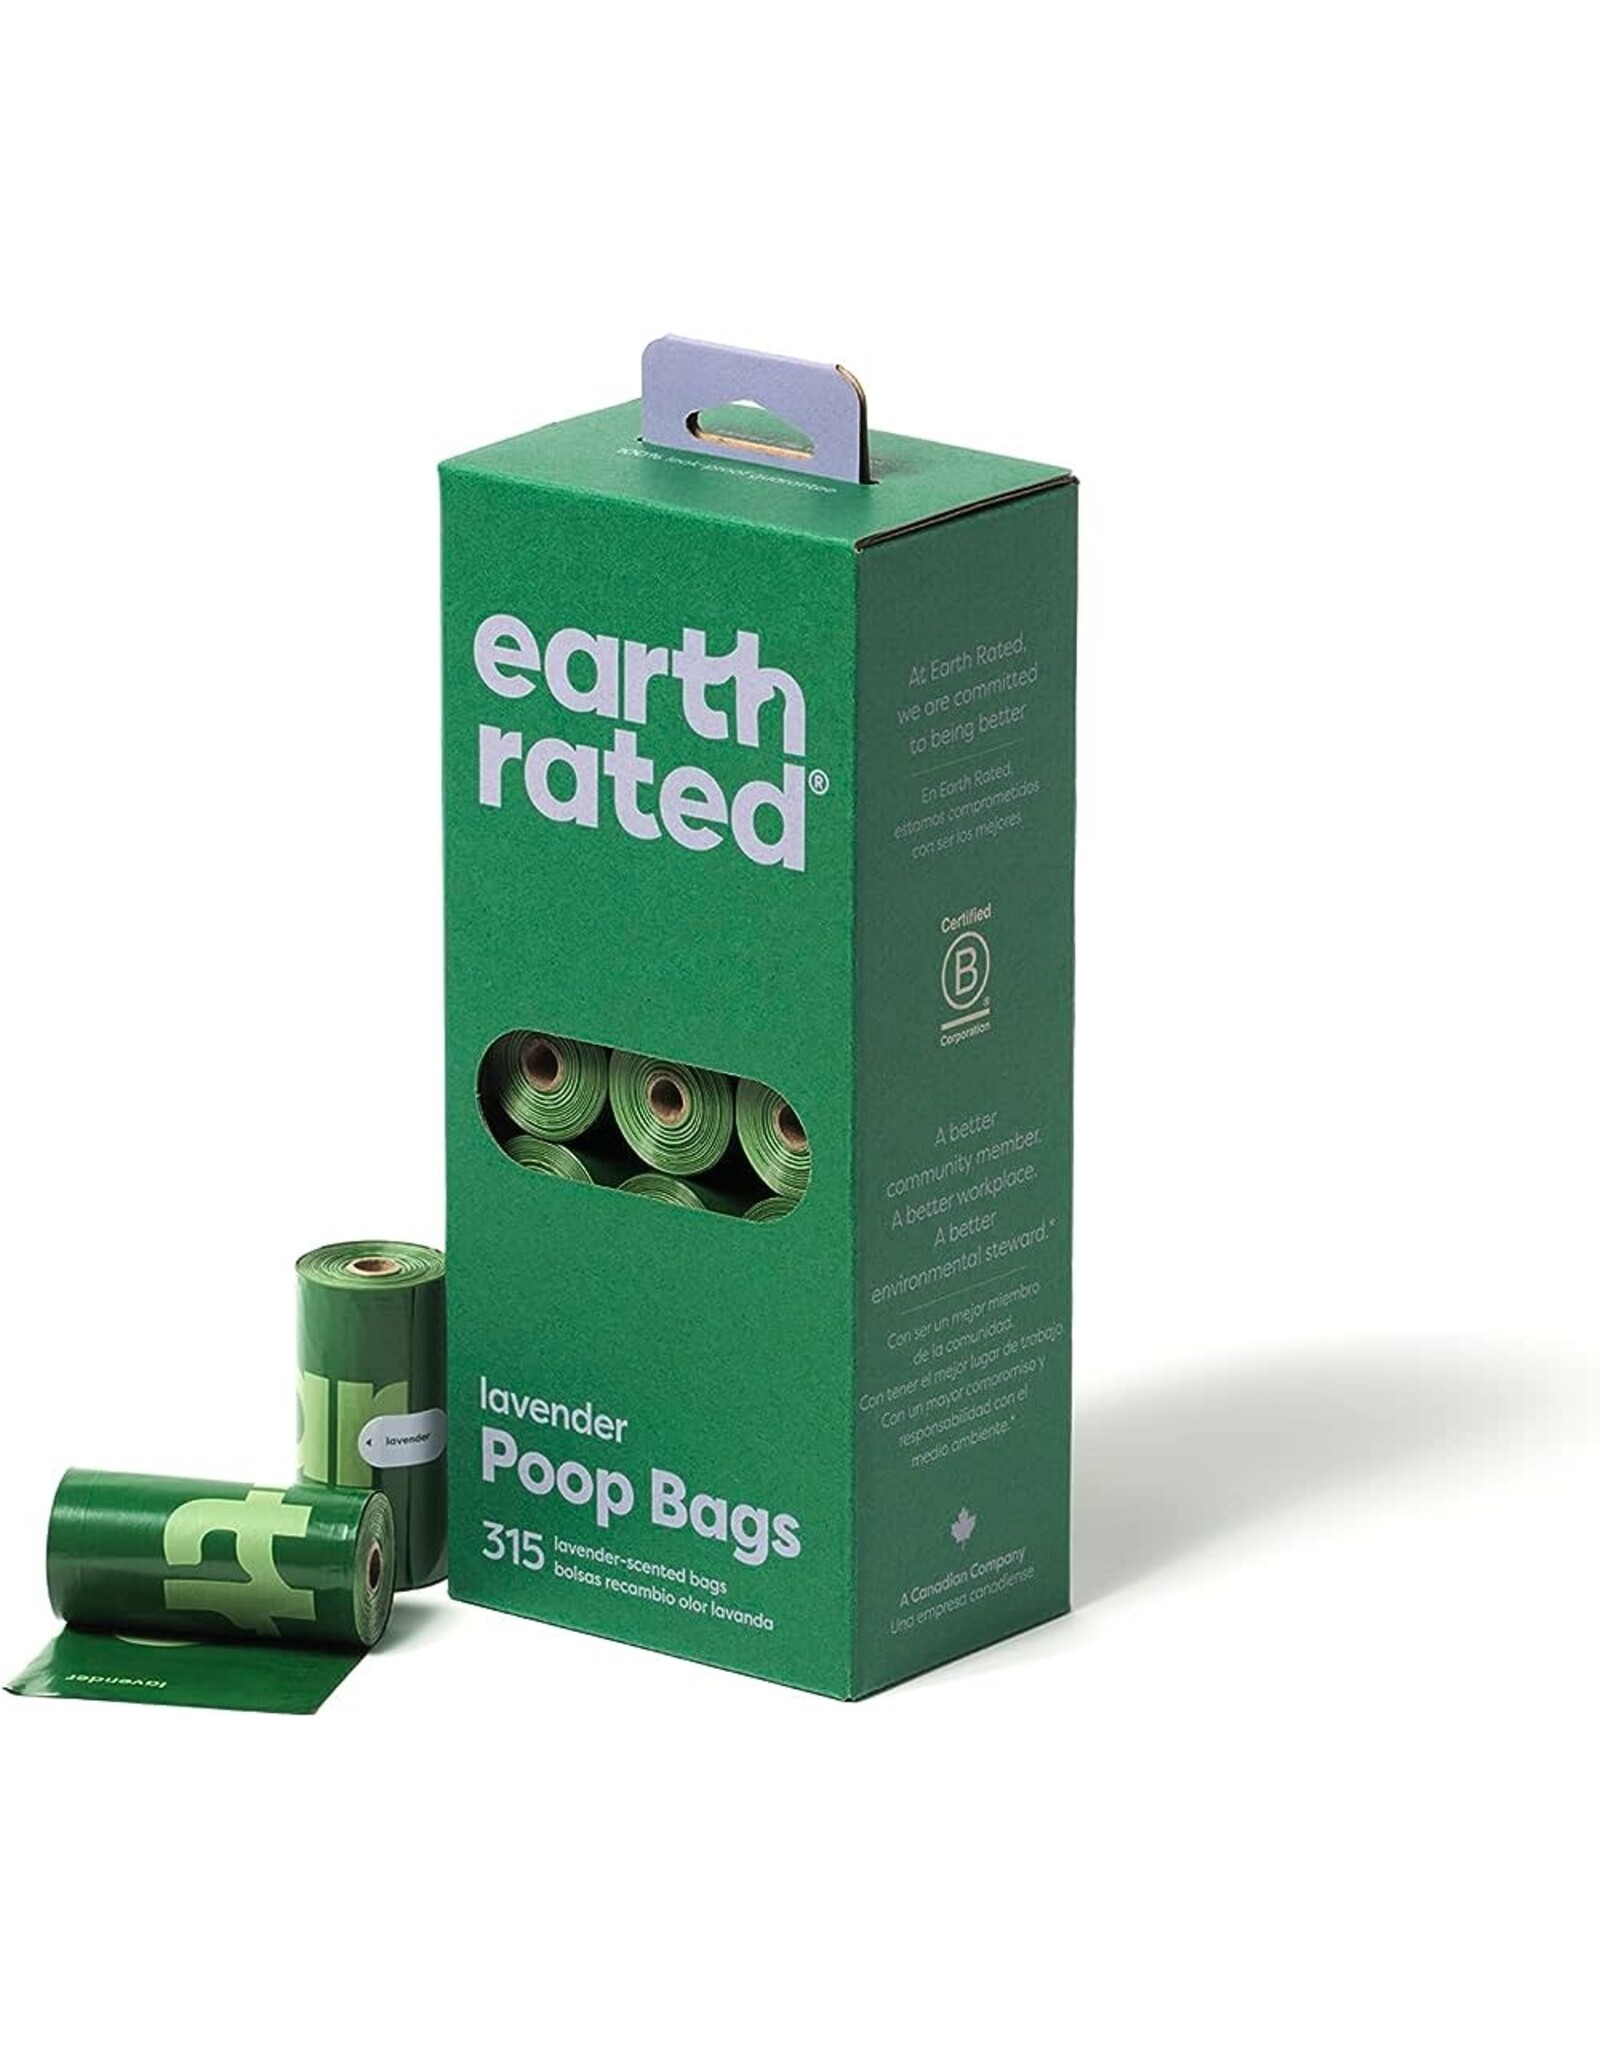 earth rated Earth rated boîte 315 sacs